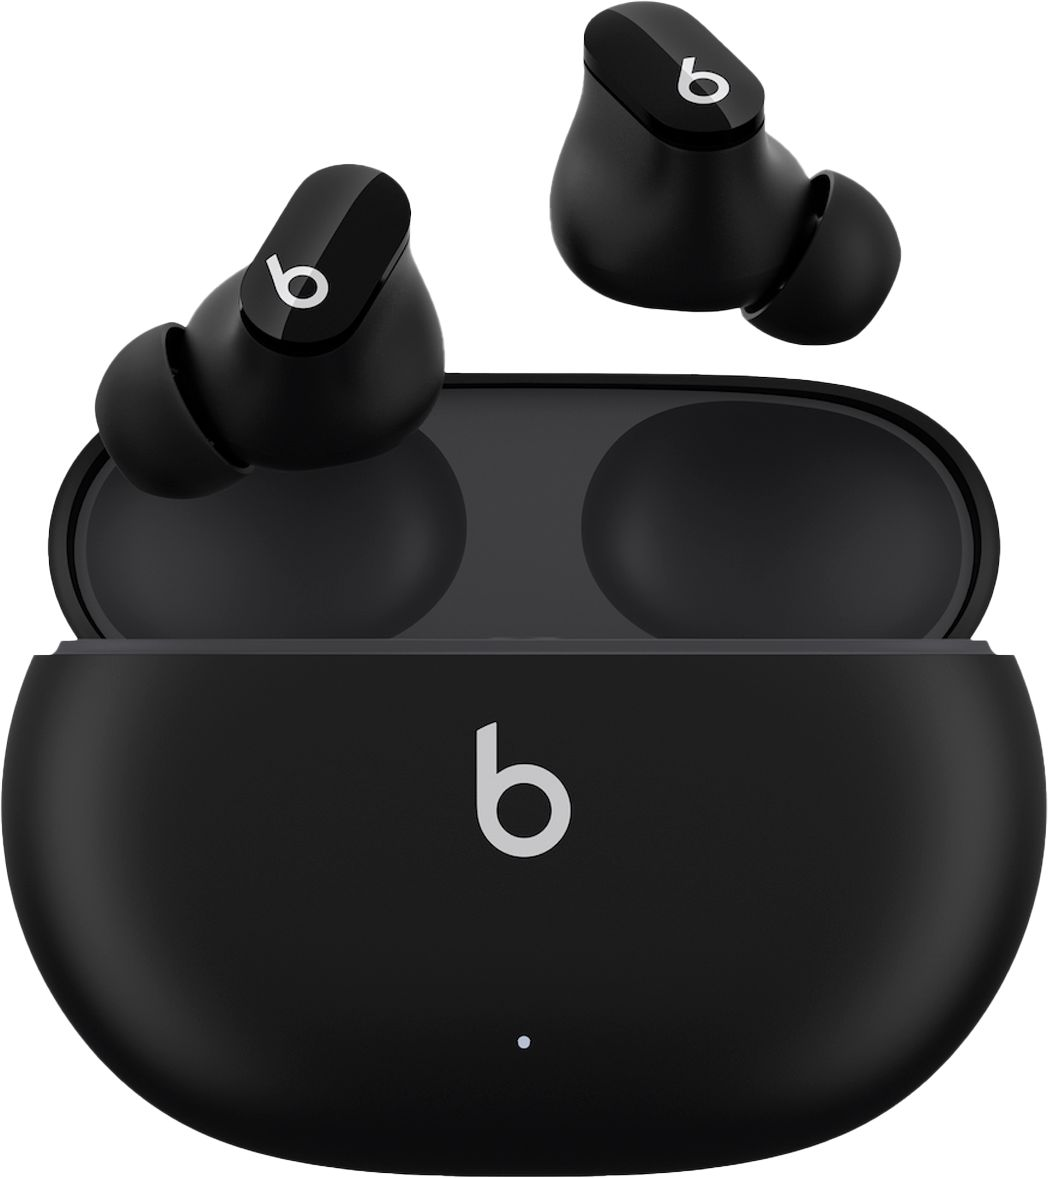 Beats by Dr. Dre Beats Studio Buds Totally Wireless Noise Cancelling Earbuds Black MJ4X3LL/A - Best Buy $89.99